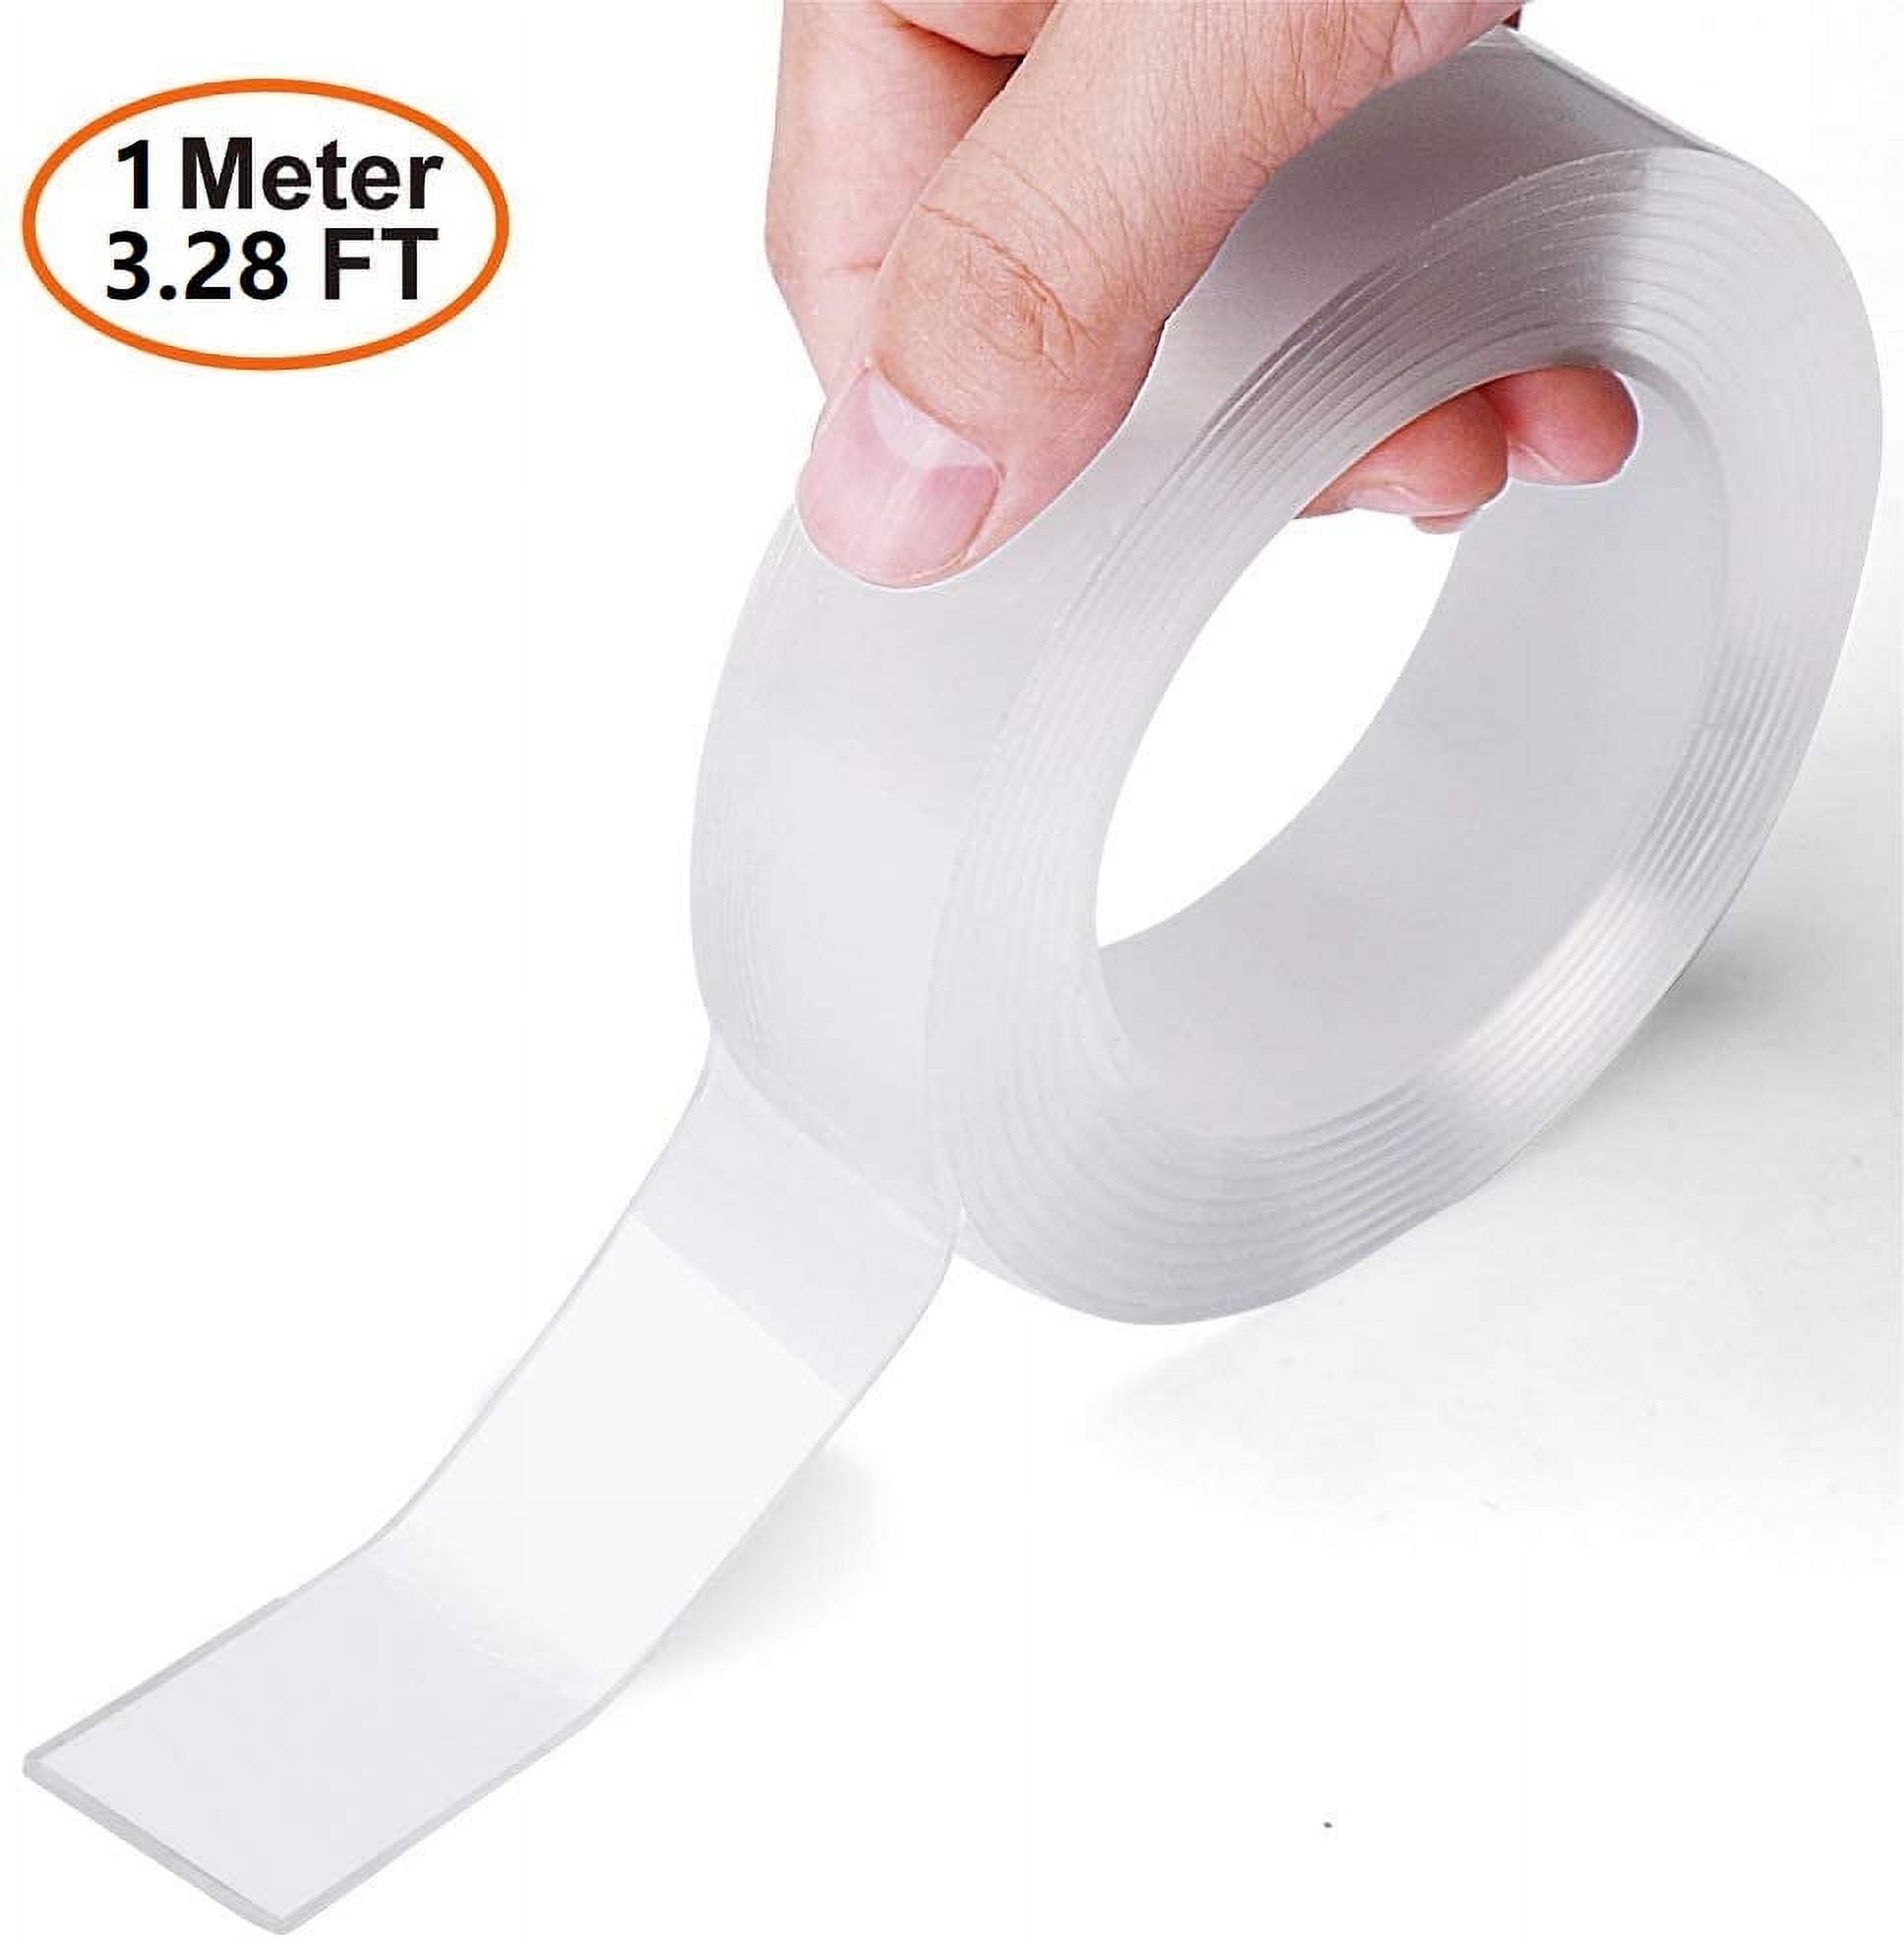 12pcs White Removable Adhesive Magic Tape For Fixing Frames Without Nails,  Double-sided Tape For Hanging Pictures, Posters Or Paintings, No Damage To  Walls. Easy To Install With No Tools. Perfect Home And